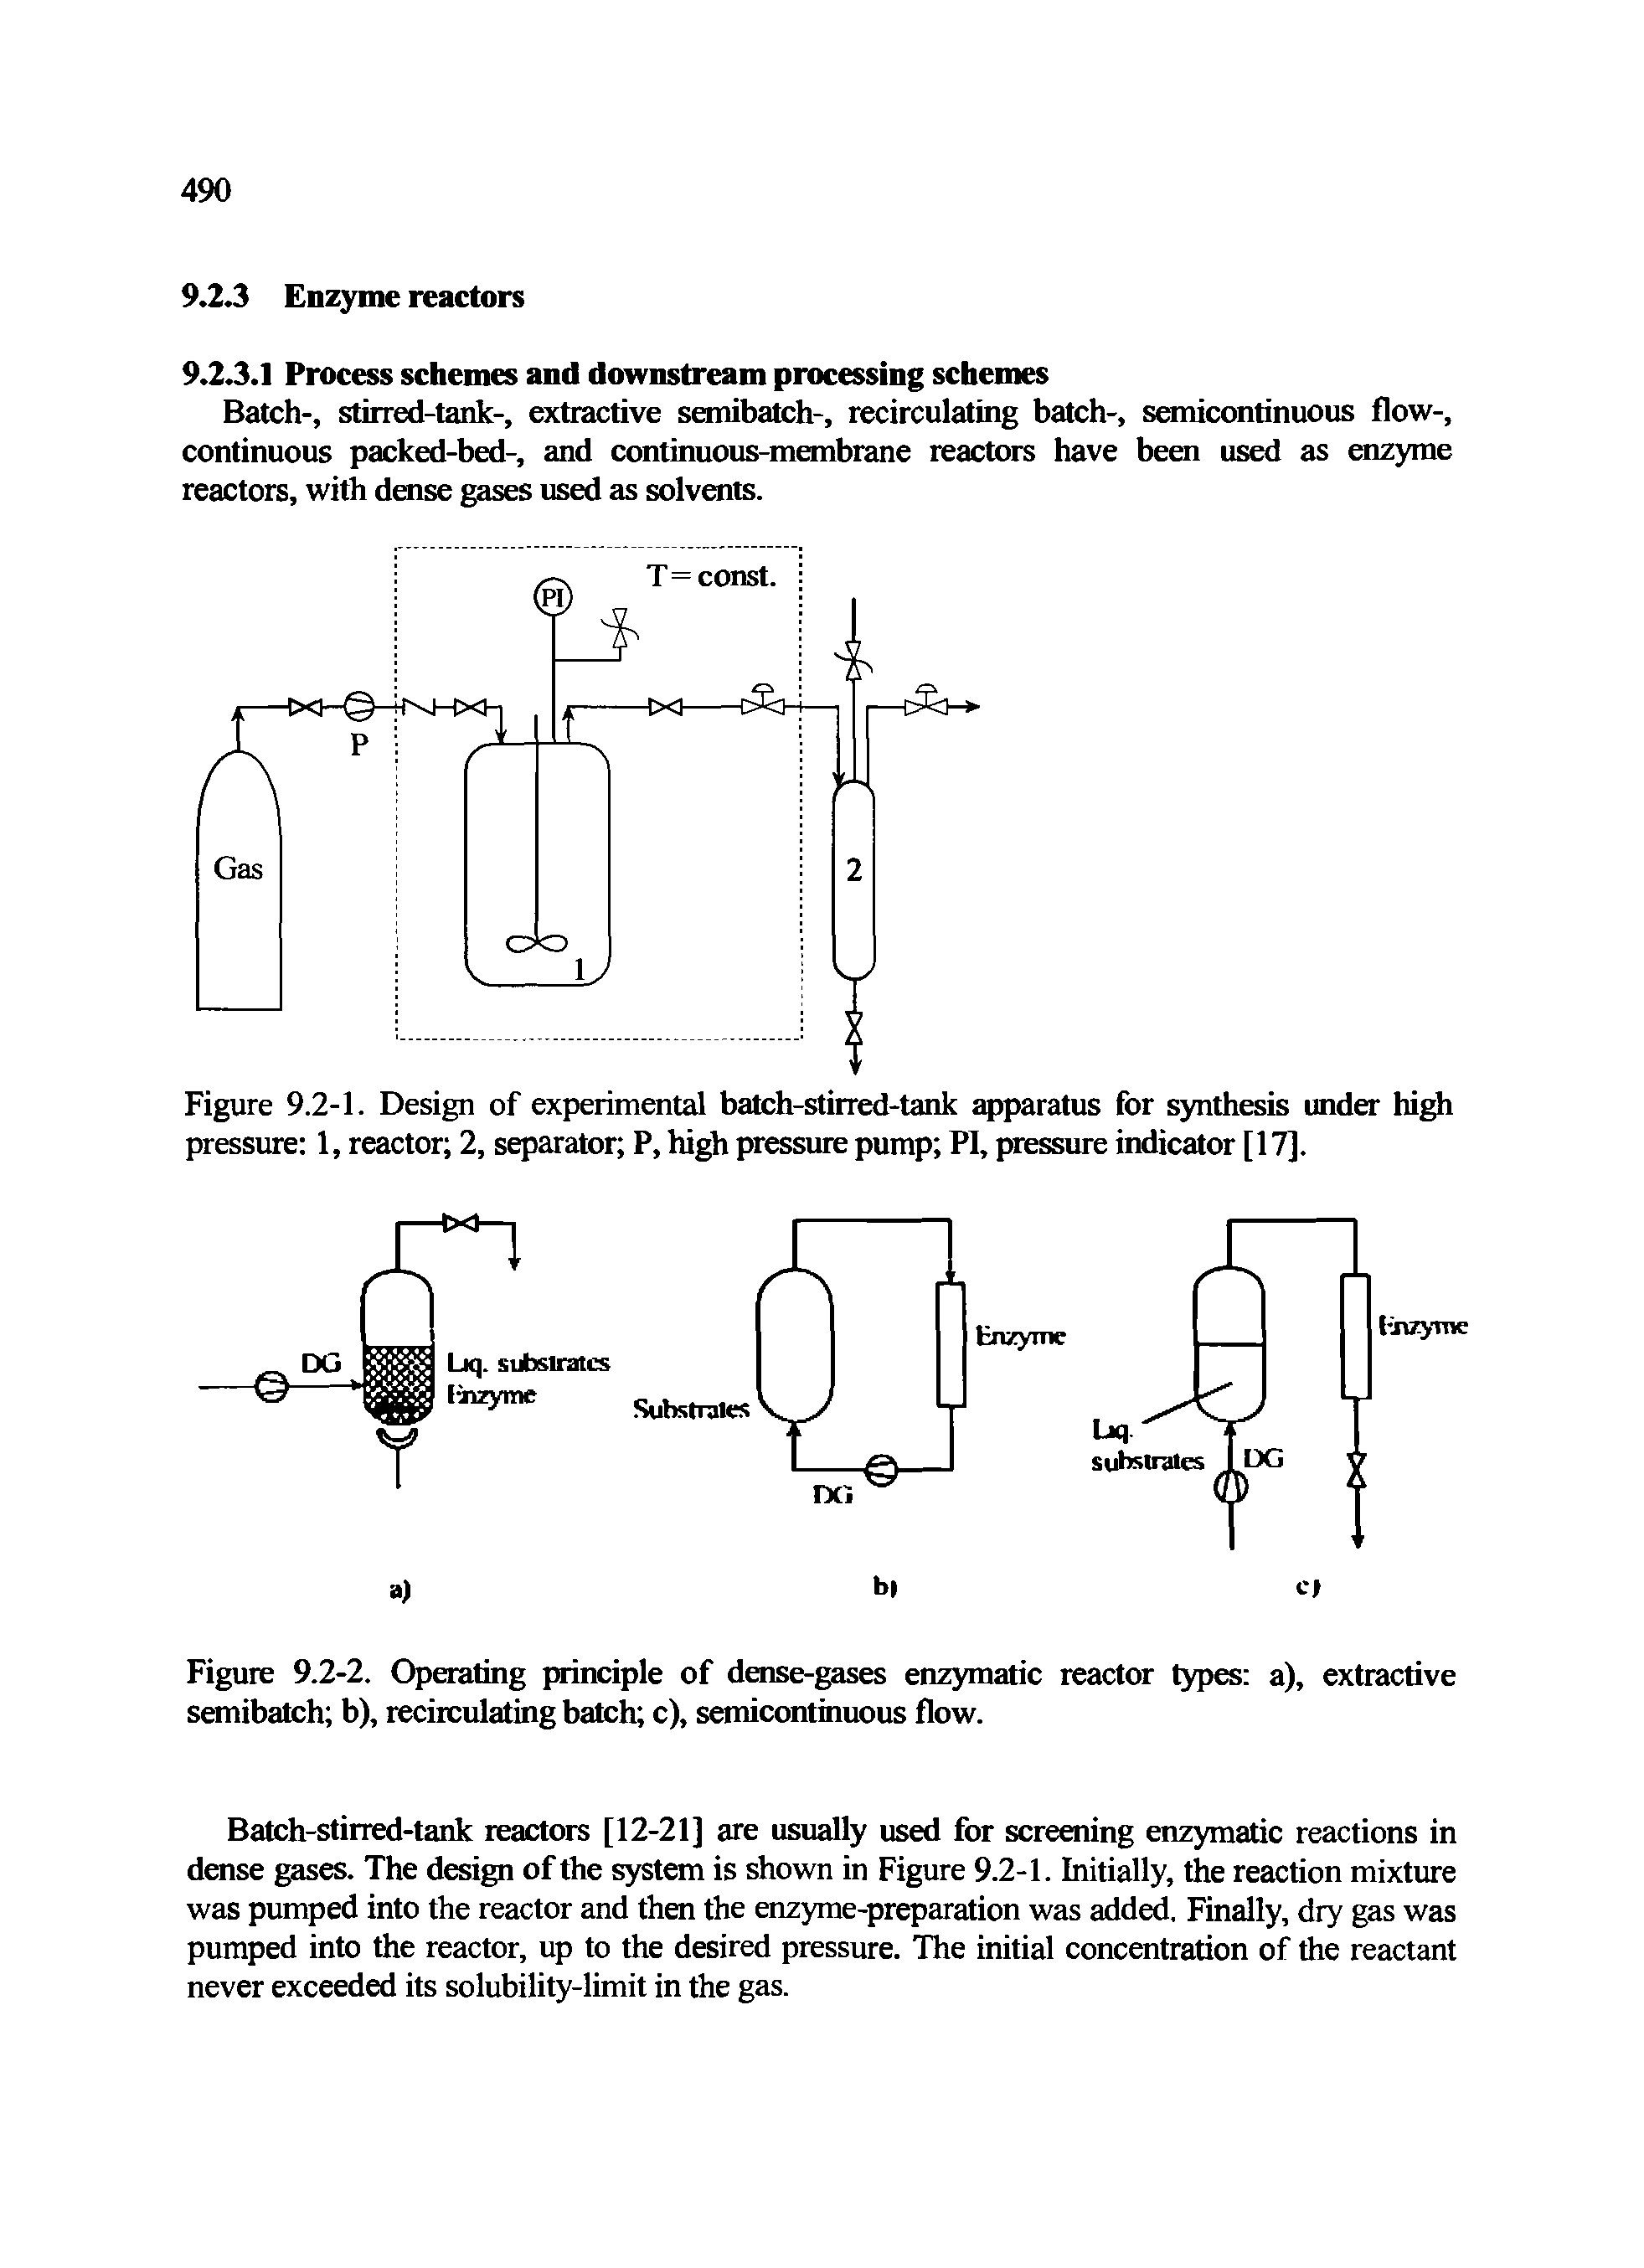 Figure 9.2-2. Operating principle of dense-gases enzymatic reactor types a), extractive semibatch b), recirculating batch c), semicontinuous flow.